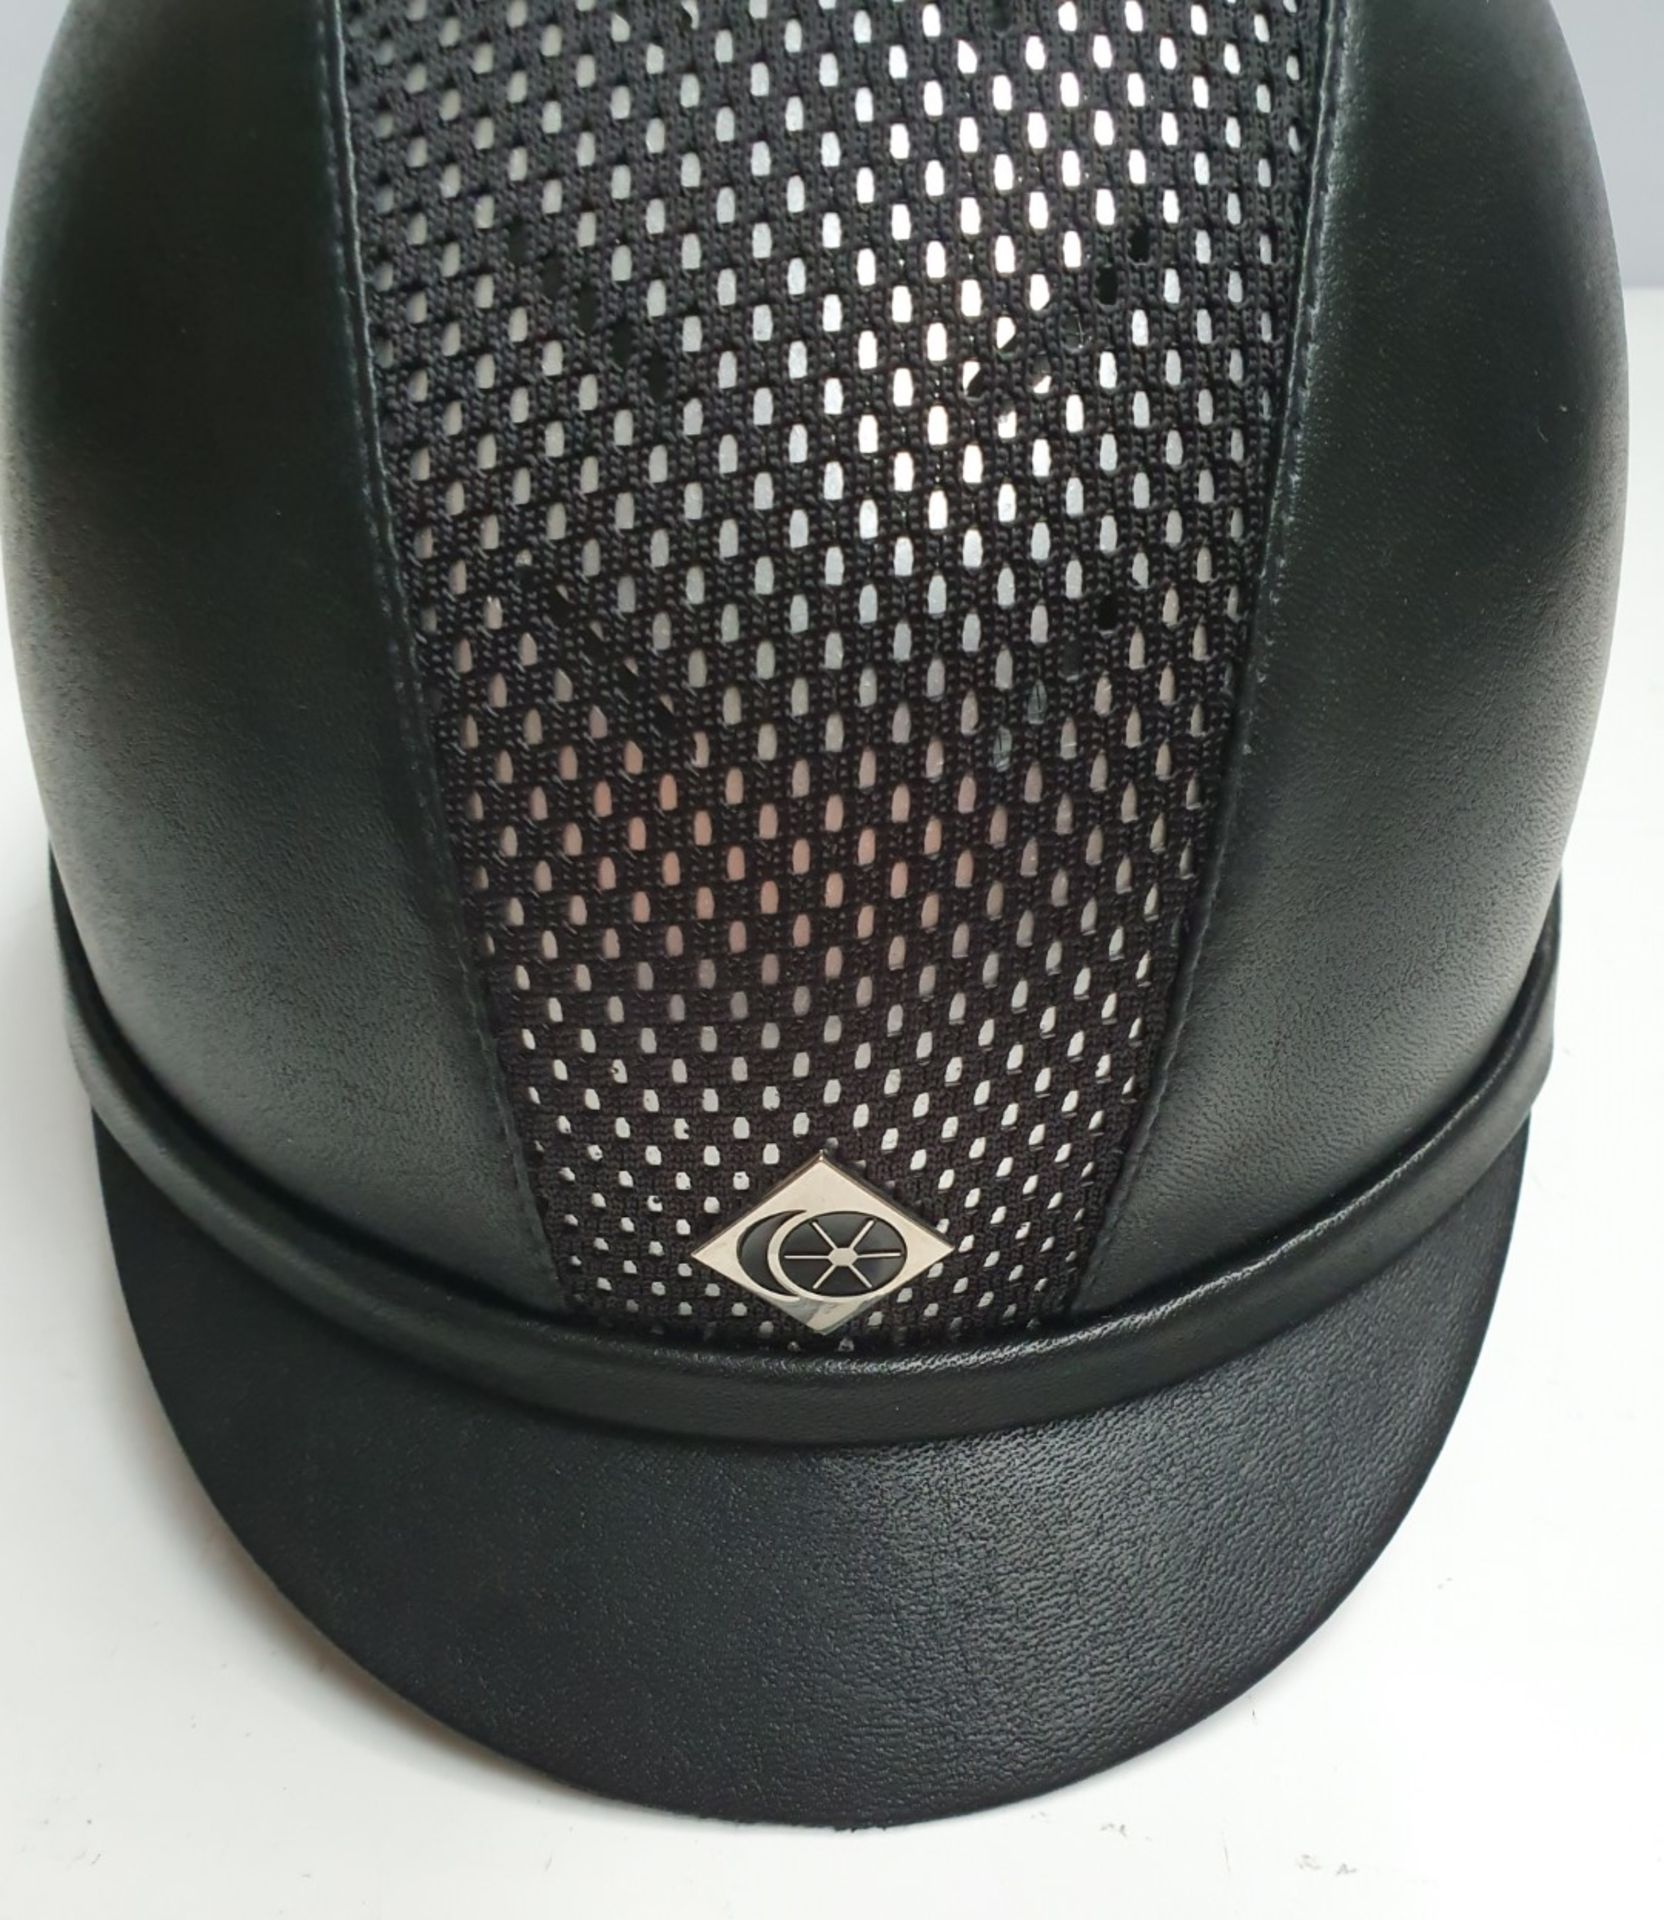 1 x Charles and Owen Horse Riding Helmet in Black / Silver and Mesh - Size 54cm - Ref722 - CL401 - B - Image 2 of 12